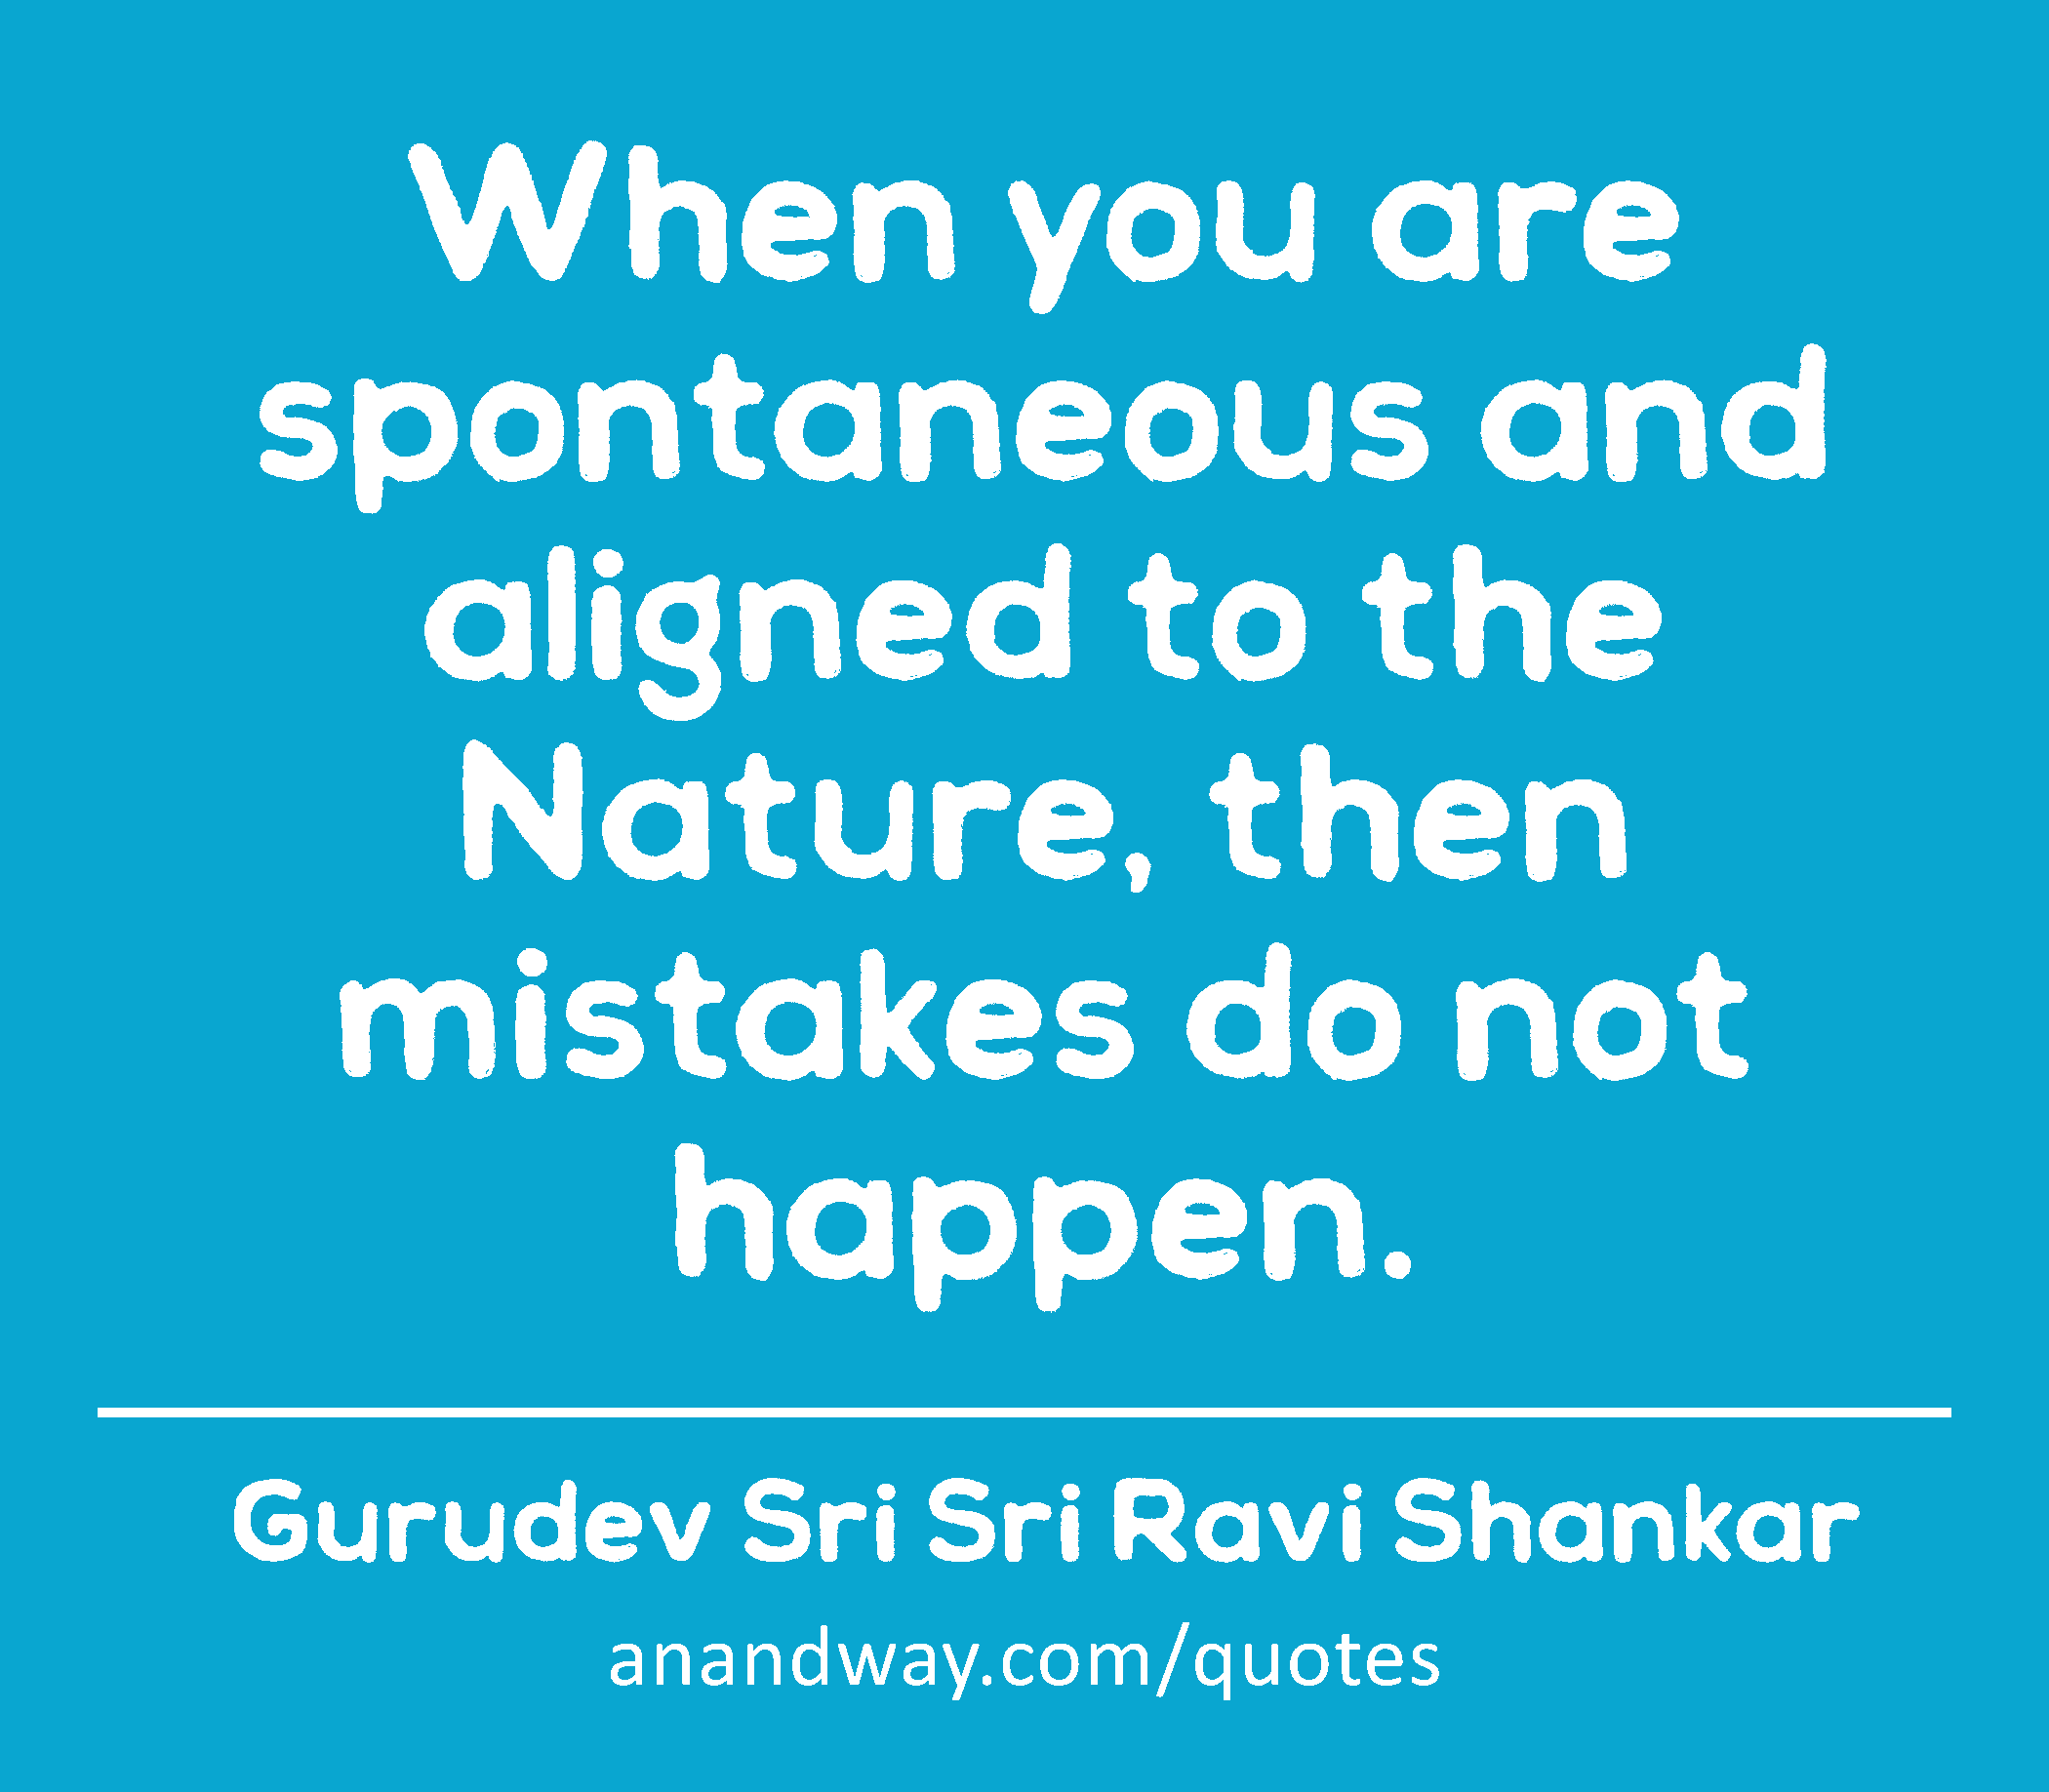 When you are spontaneous and aligned to the Nature, then mistakes do not happen. 
 -Gurudev Sri Sri Ravi Shankar